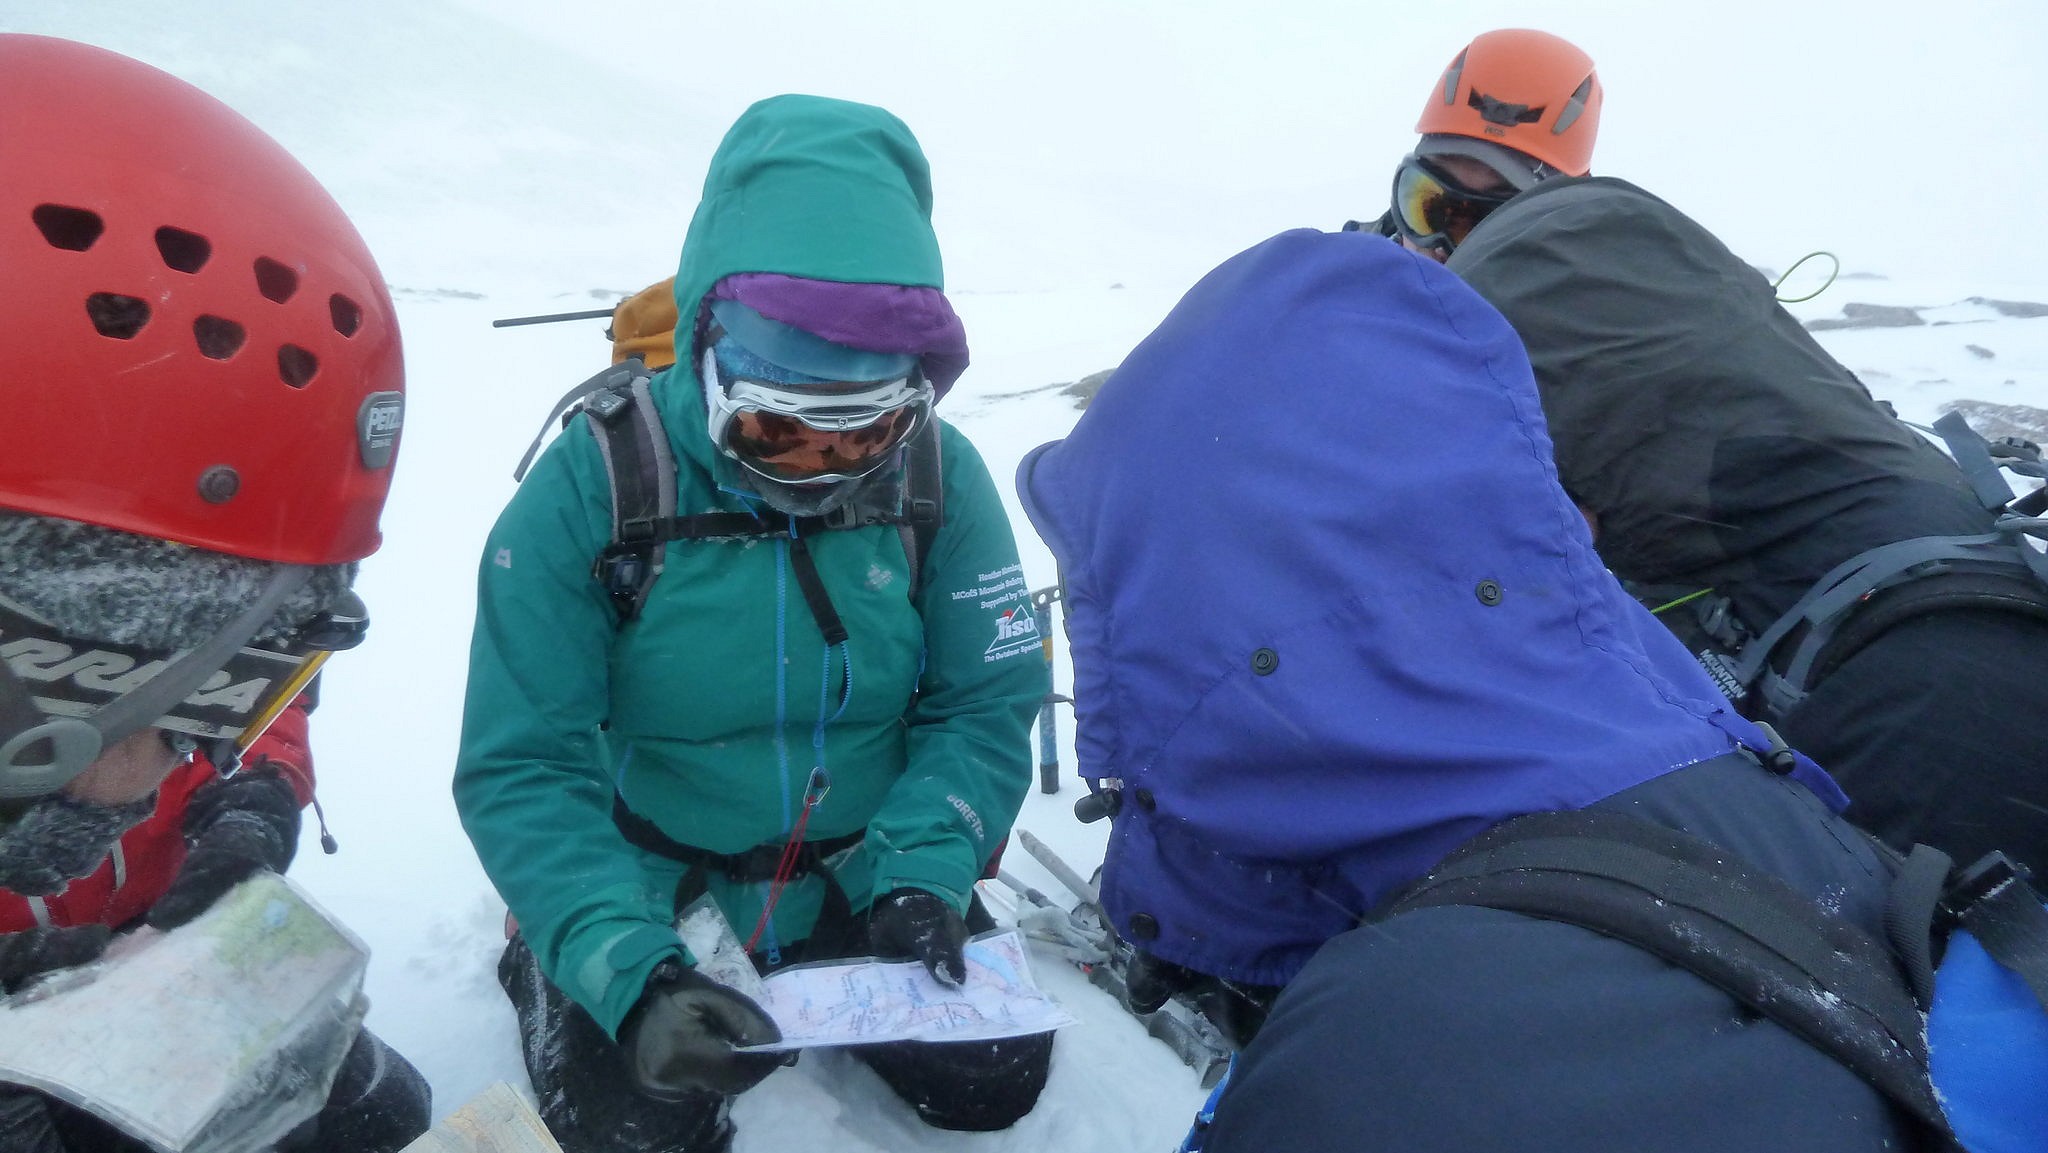 Part of the day job, teaching winter navigation  © Heather Morning